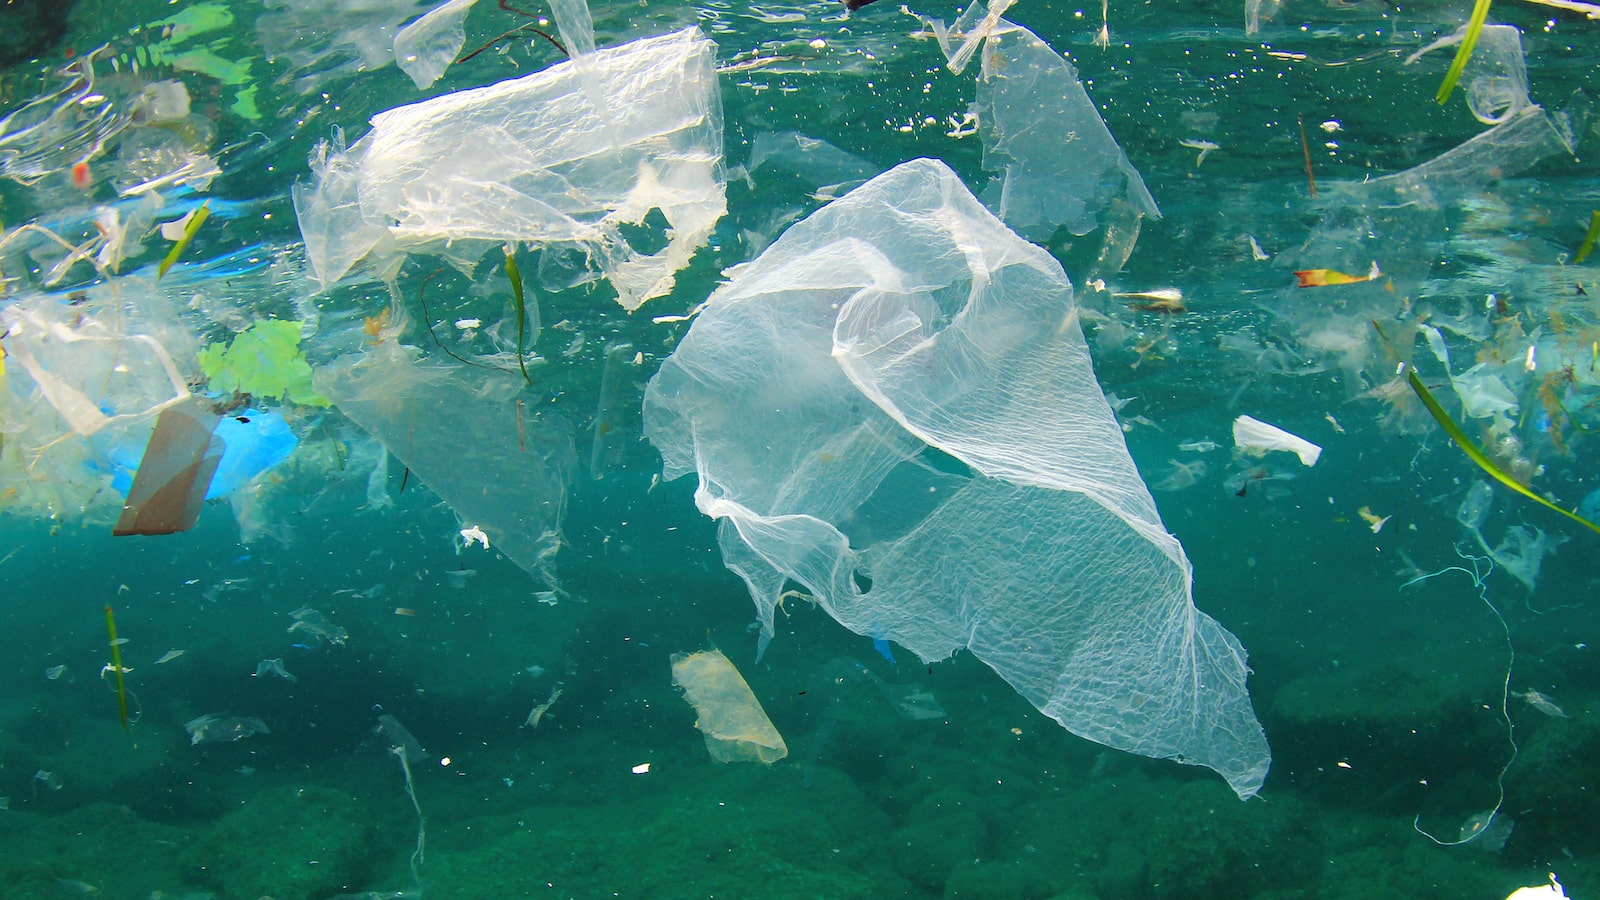 Tell the EPA: Take bold action on plastic pollution